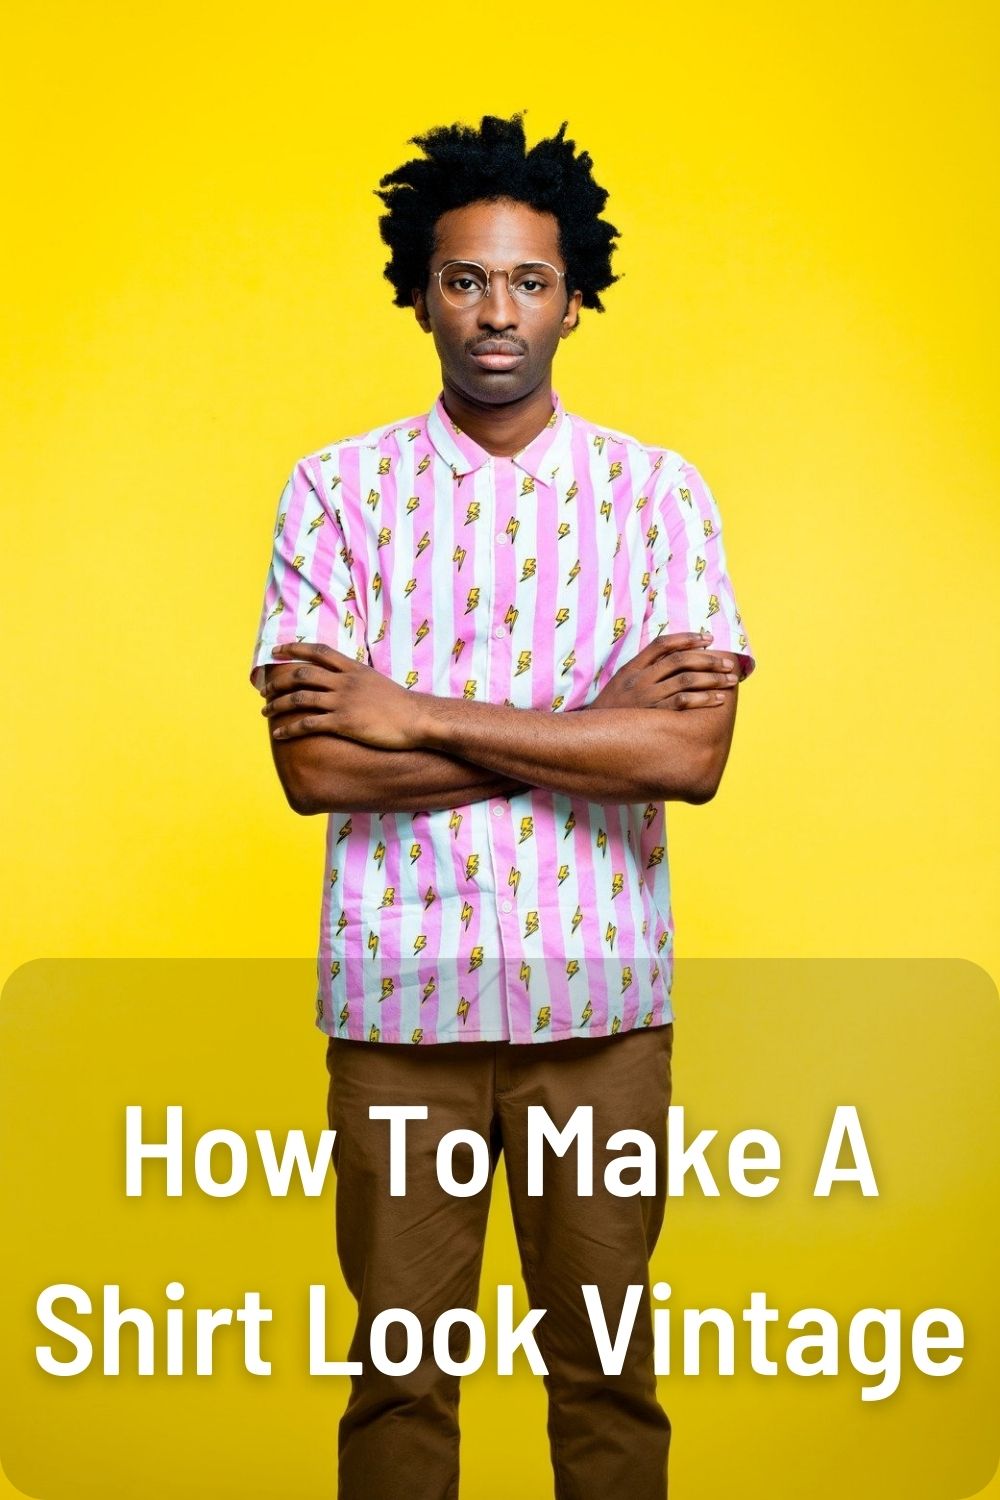 How To Make A Shirt Look Vintage